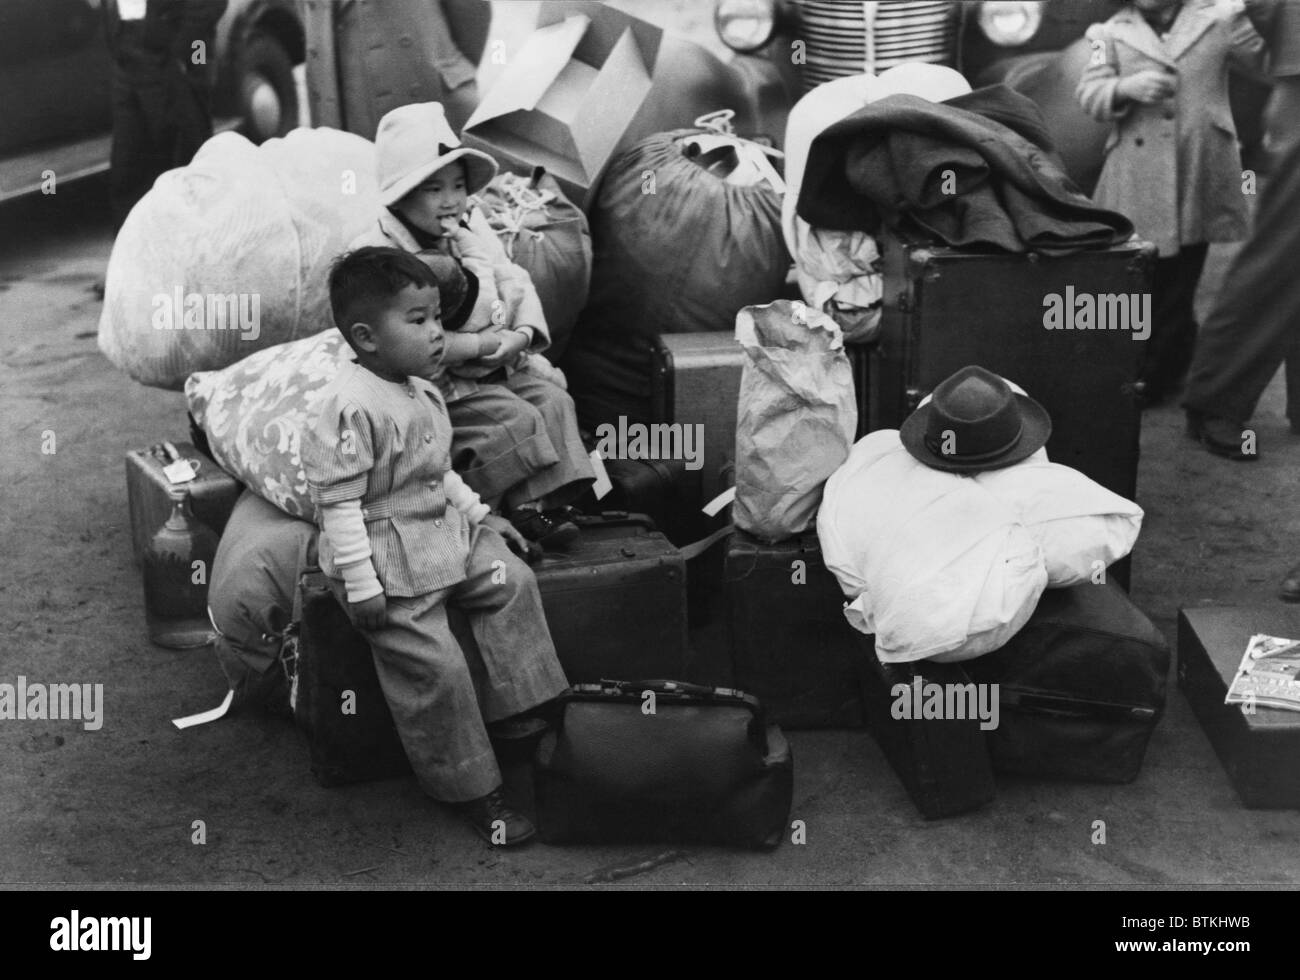 Japanese American children sit among their family's belongings as they wait for transportation to Owens Valley Assembly center for internment during World War II. Los Angeles, California, April 1942. Stock Photo